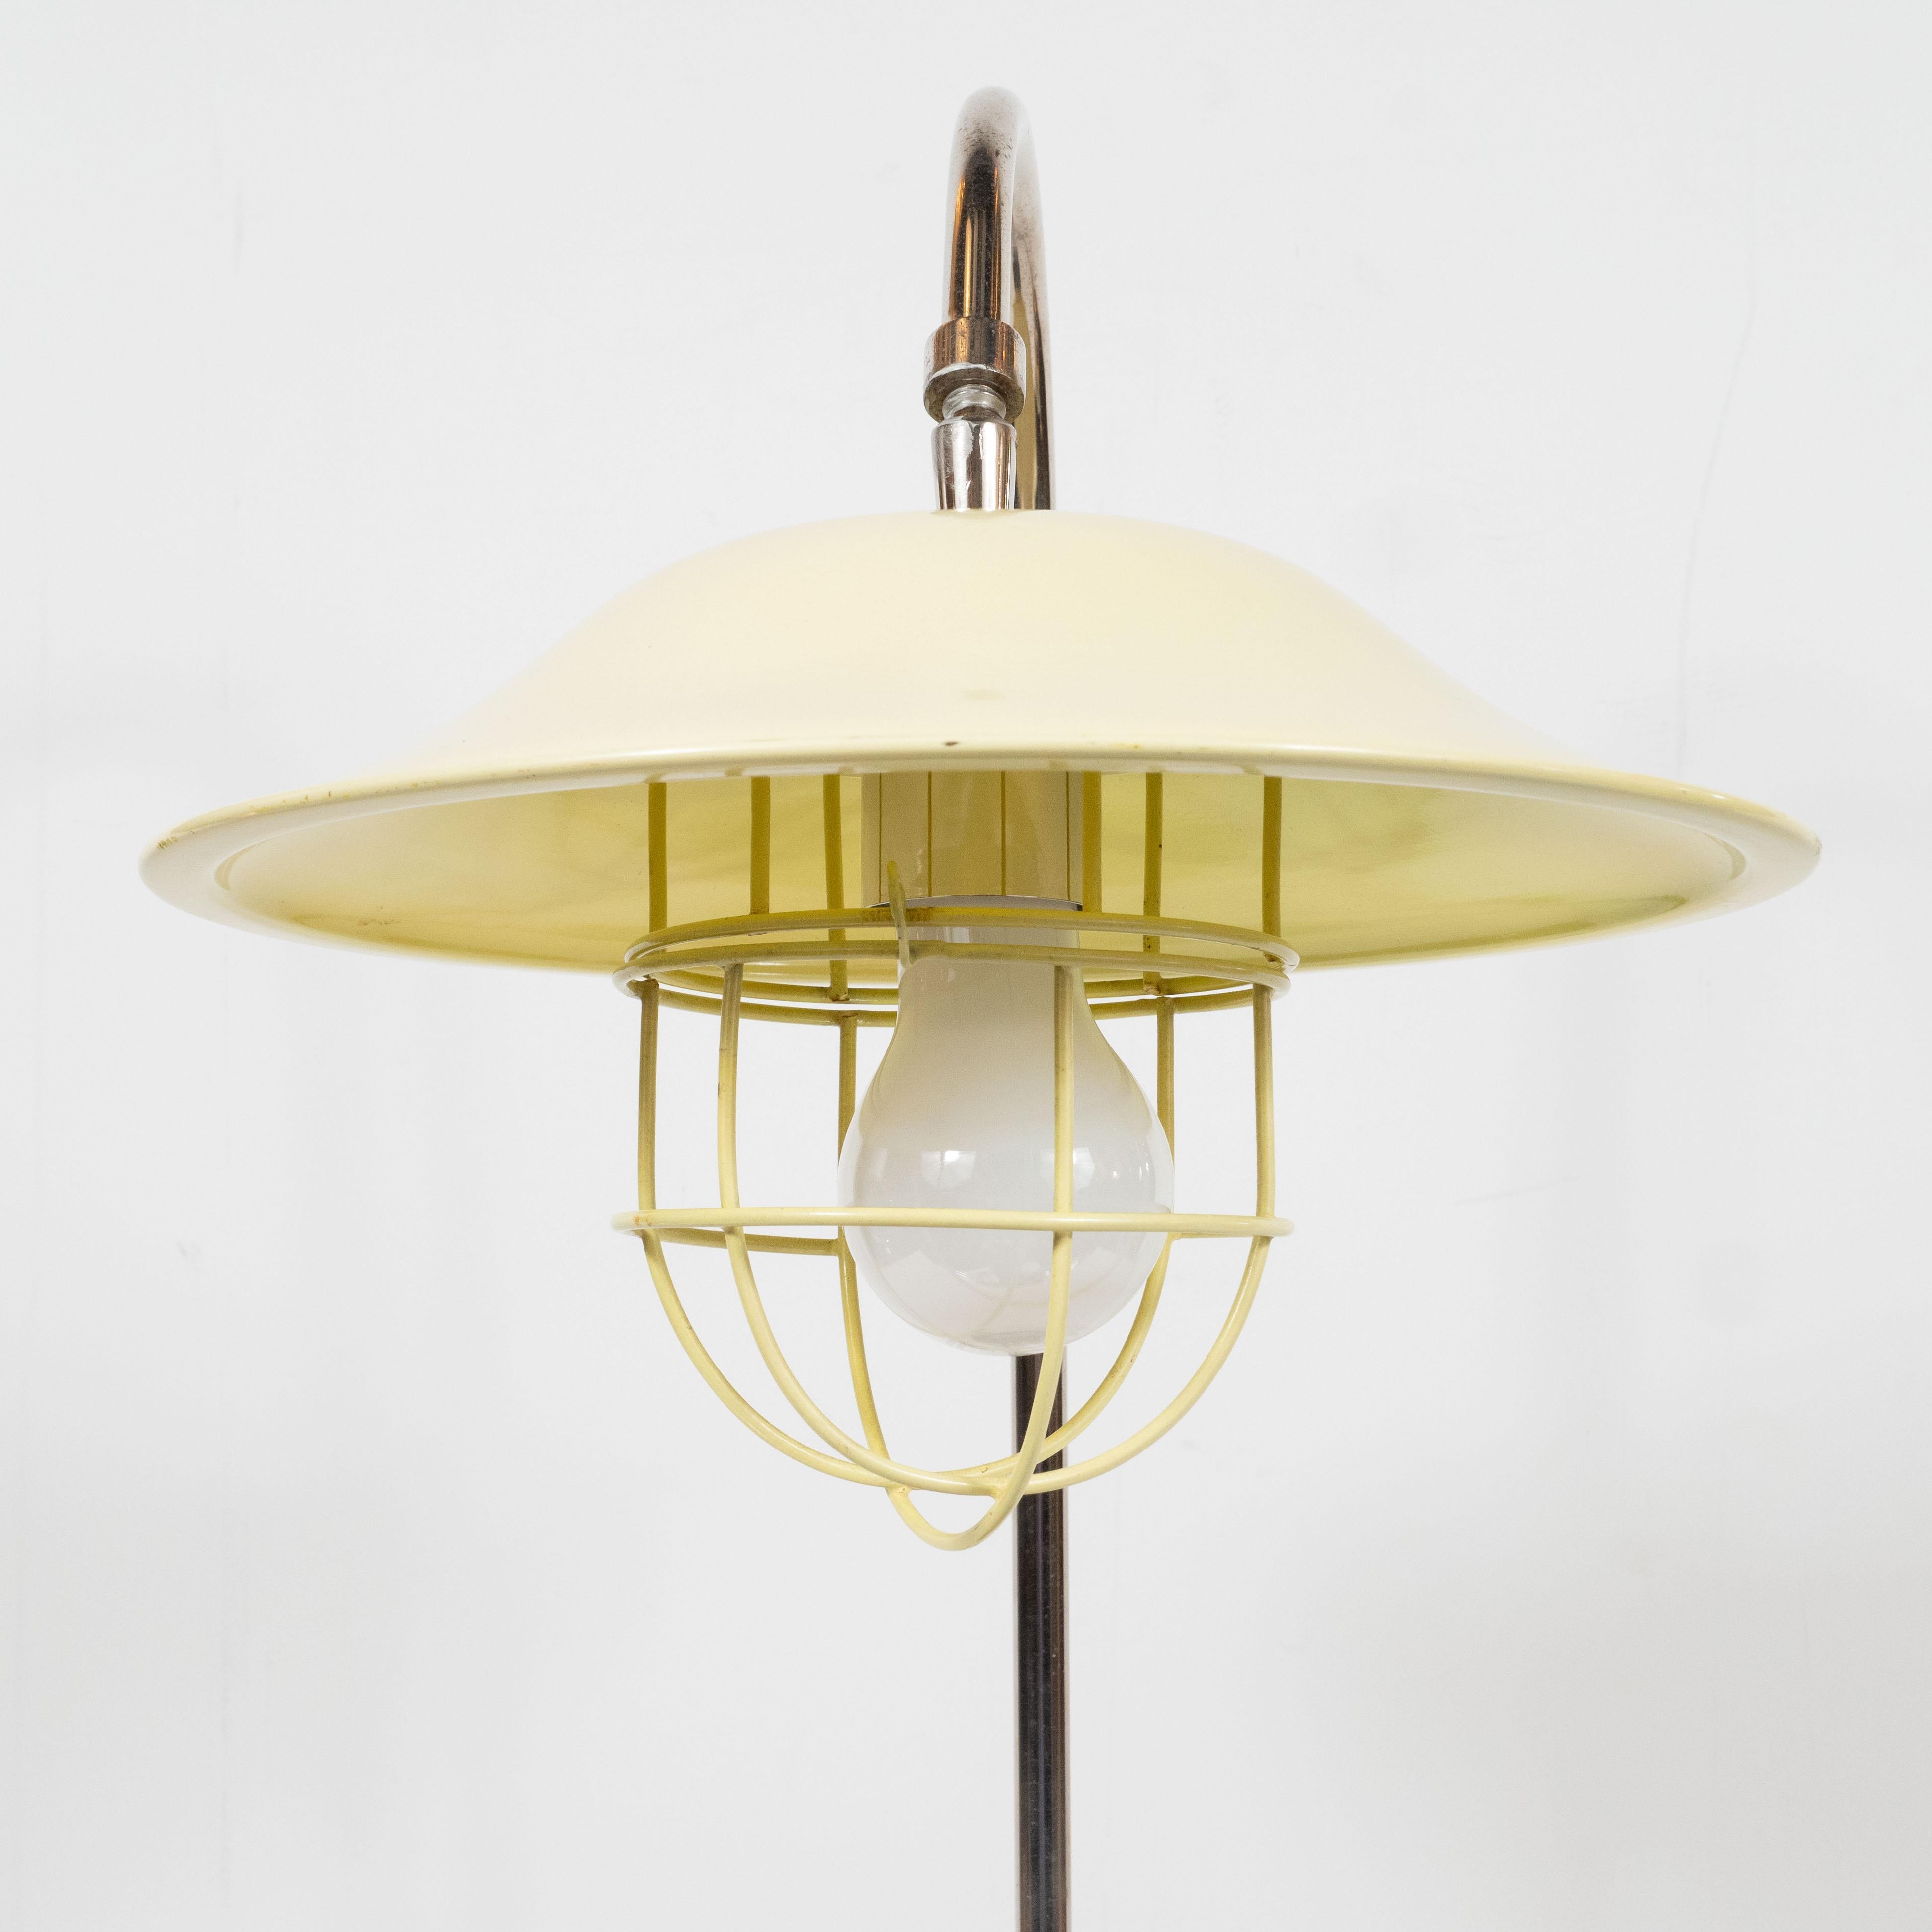 French Mid-Century Modern Chrome and Lemon Cream and Black Enamel Table Lamp For Sale 3